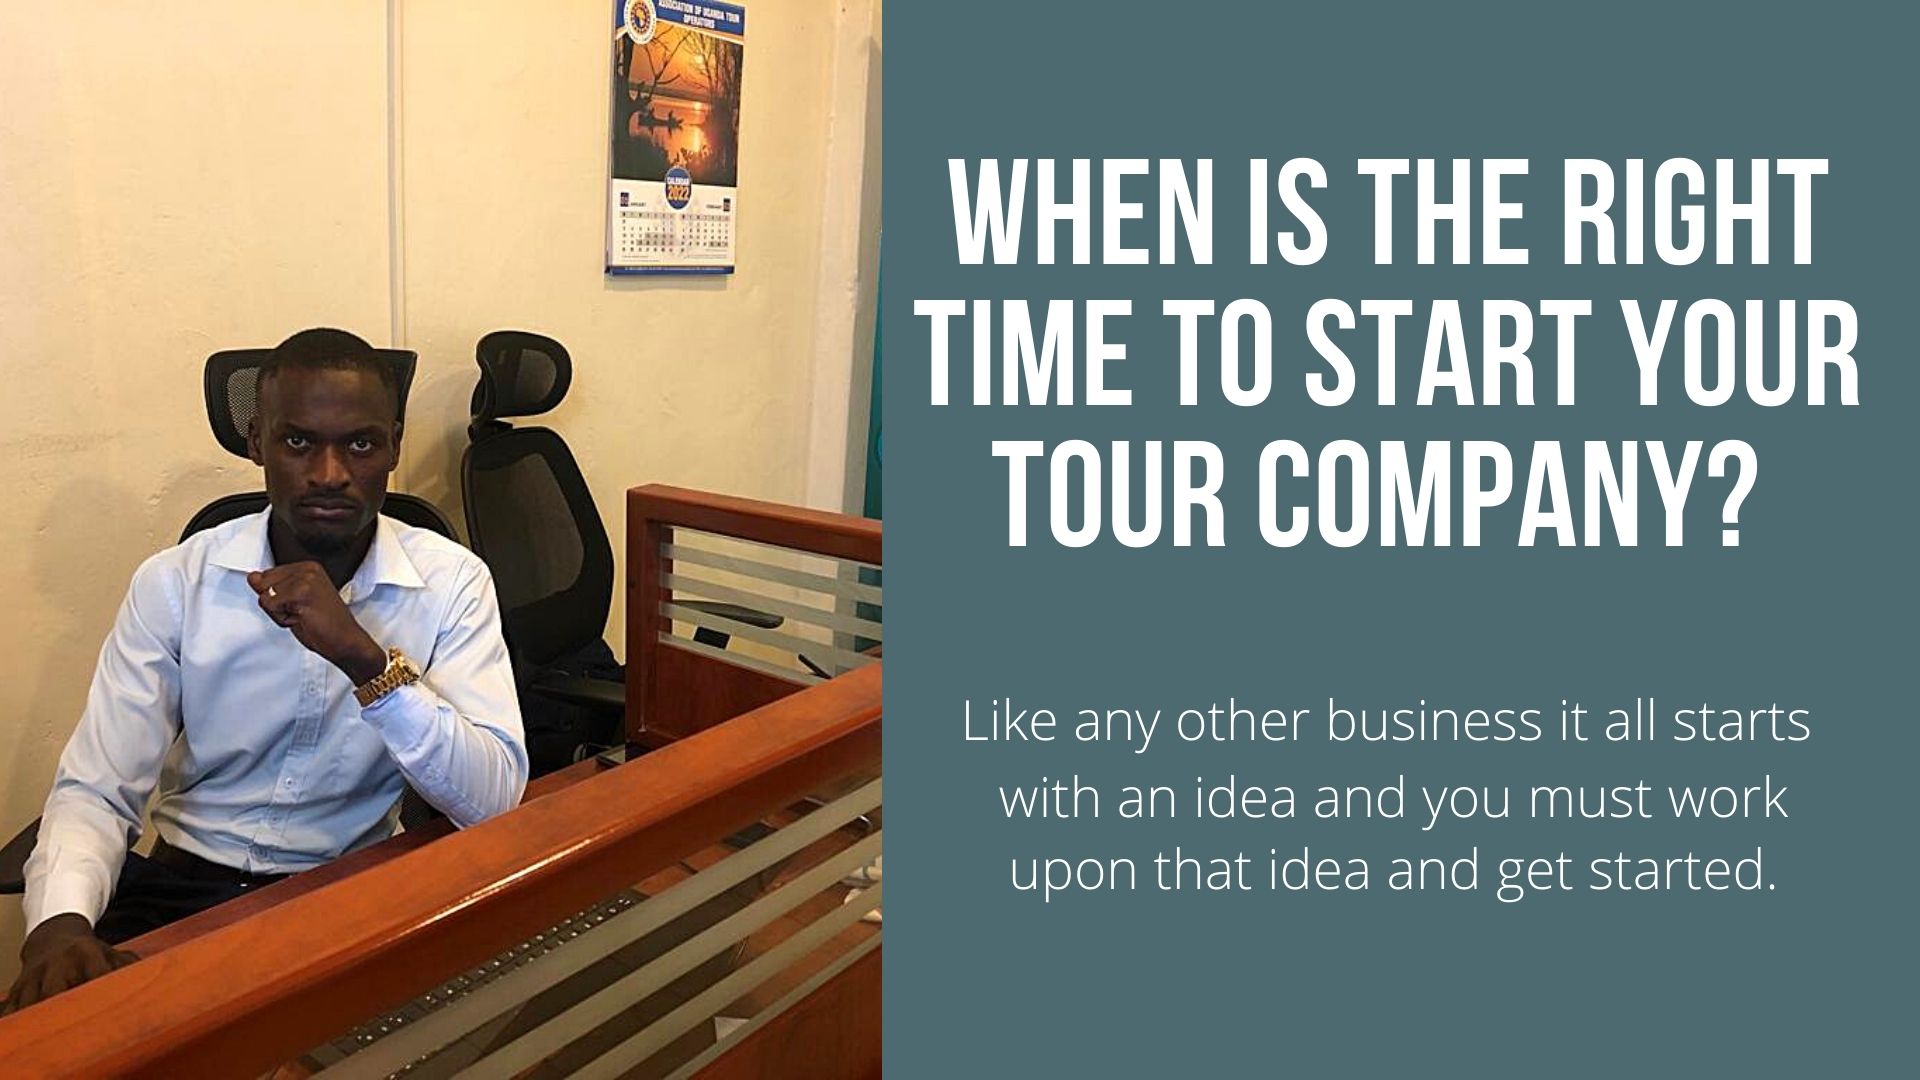 The Right Time To Start A Tour Company